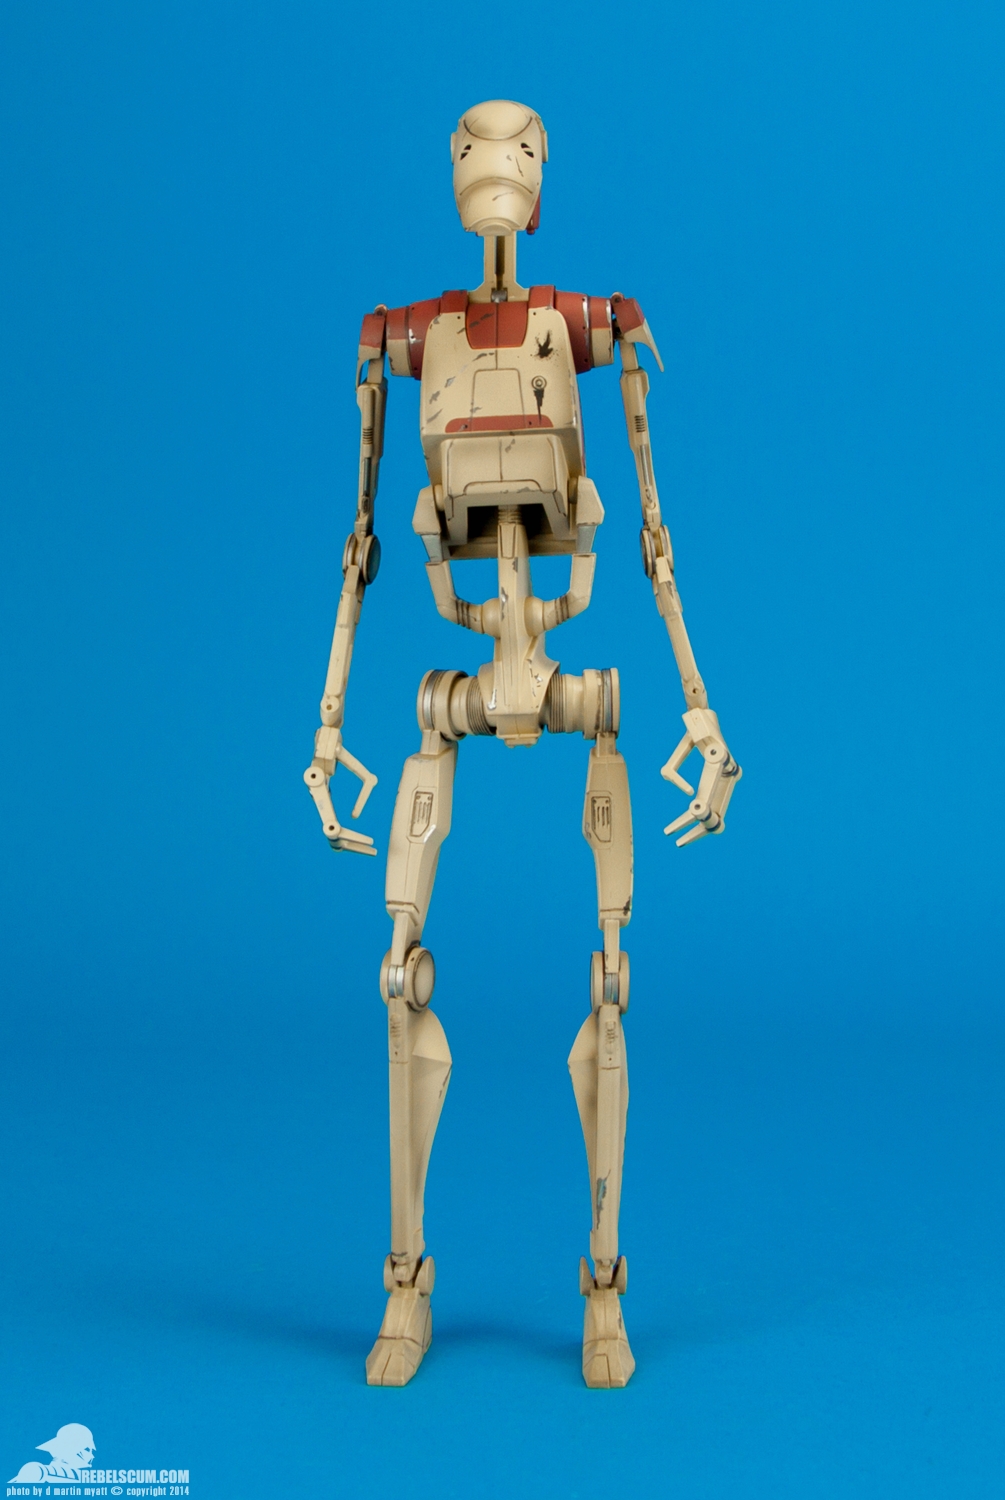 Security-Droids-Sixth-Scale-Sideshow-Collectibles-001.jpg